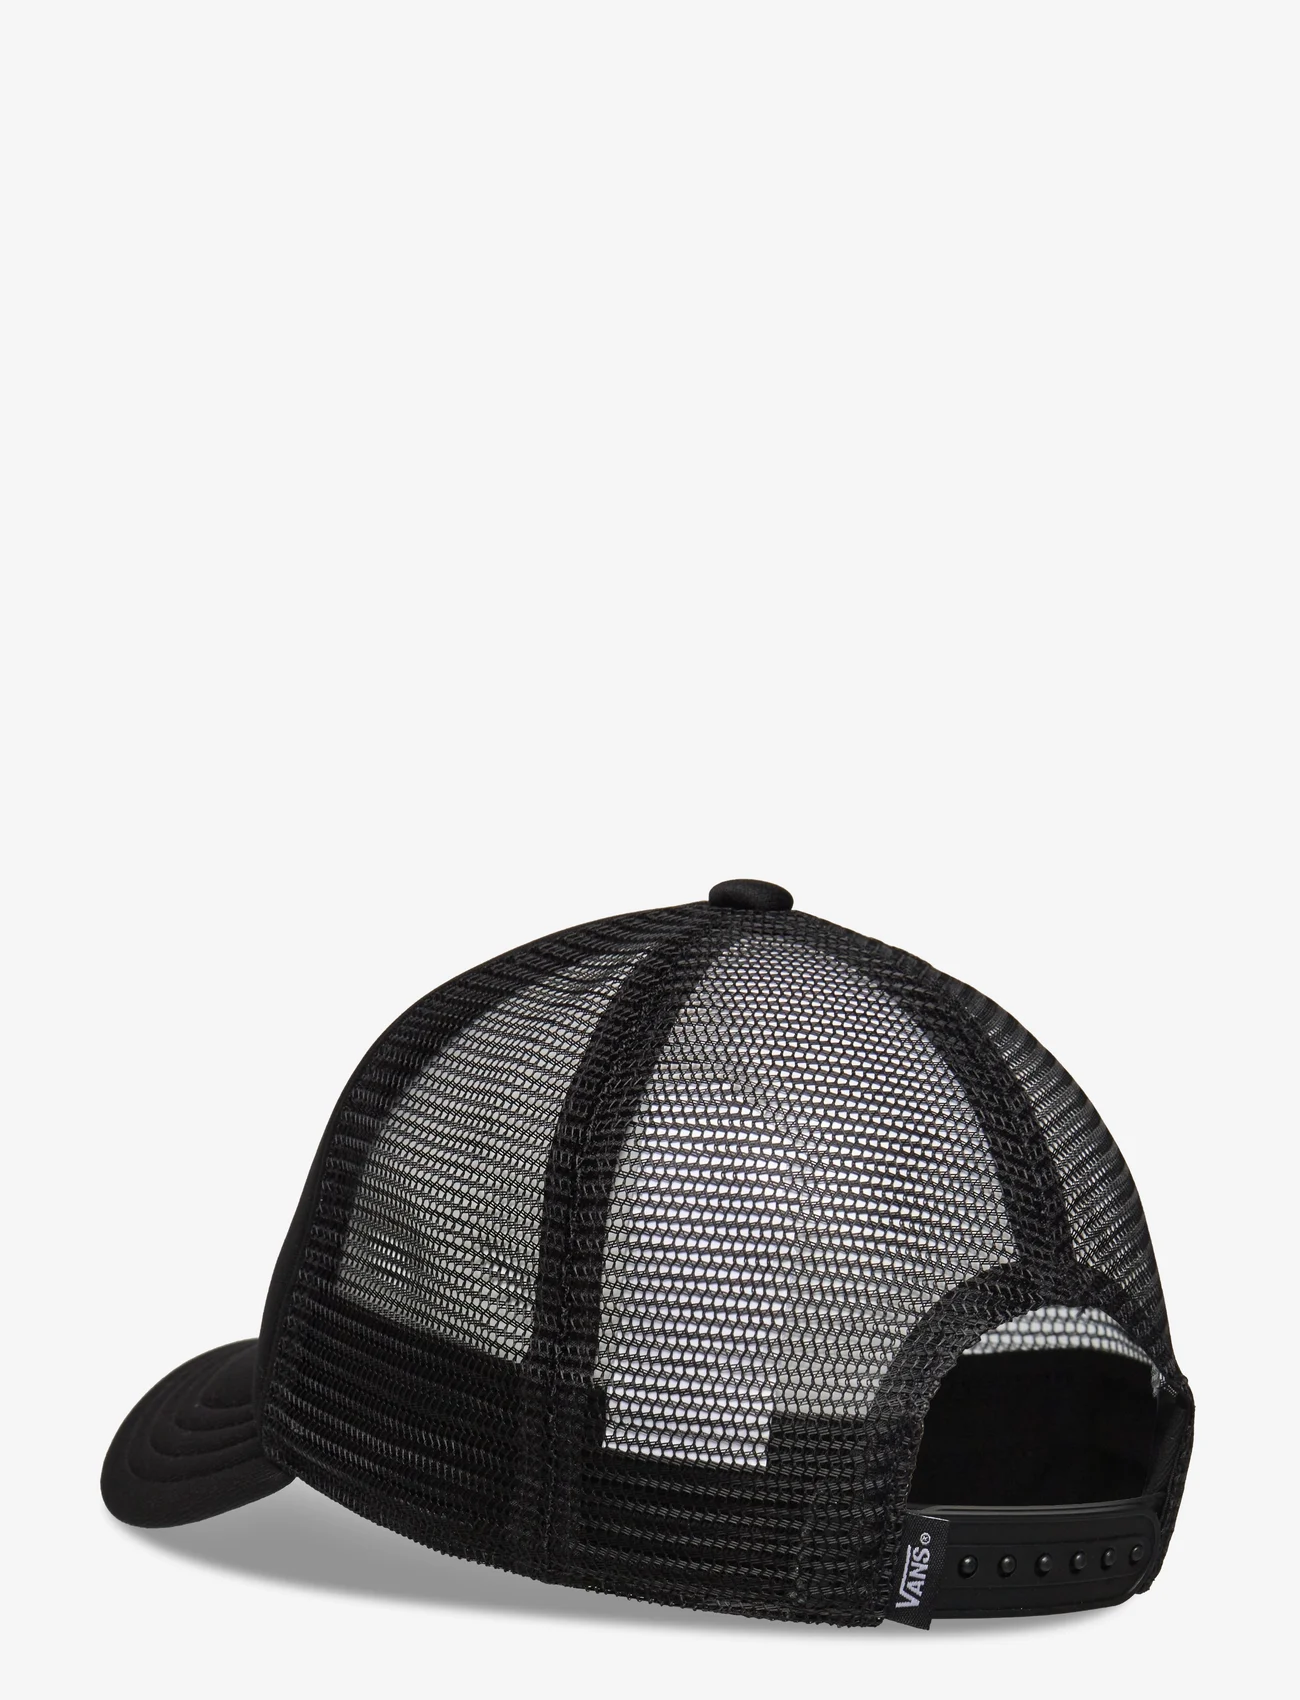 VANS - CLASSIC PATCH CURVED BILL TRUCKER HAT - sommarfynd - black - 1